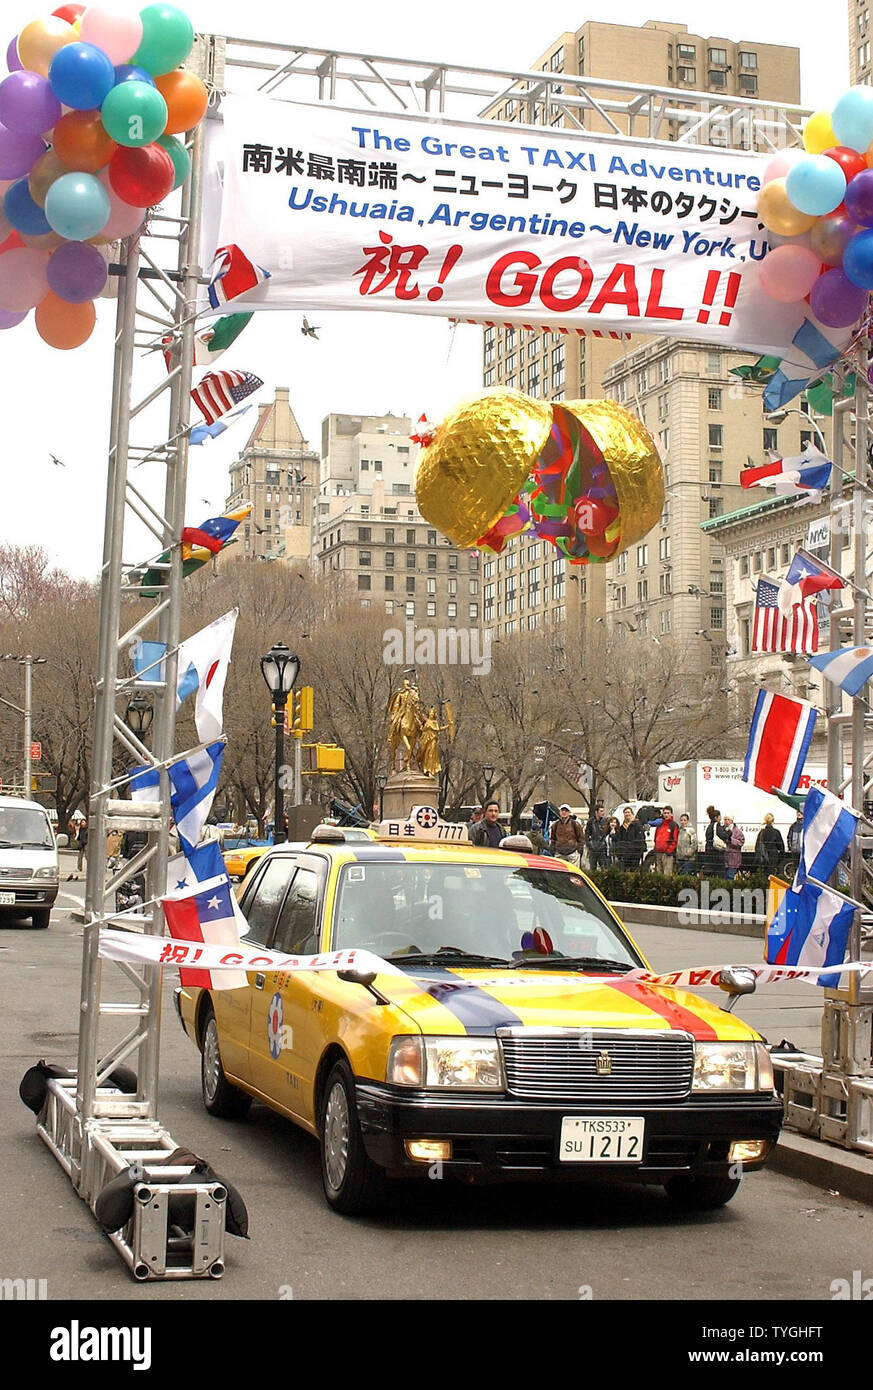 Japanese cab driver Tsyuyoshi Sakuma crosses the finish line outside the Plaza Hotel in New York City on April 2, 2004 after driving his cab from Ushuaia, Argentina on Dec. 23, 2003 to the United States.  (UPI/Ezio Petersen) Stock Photo